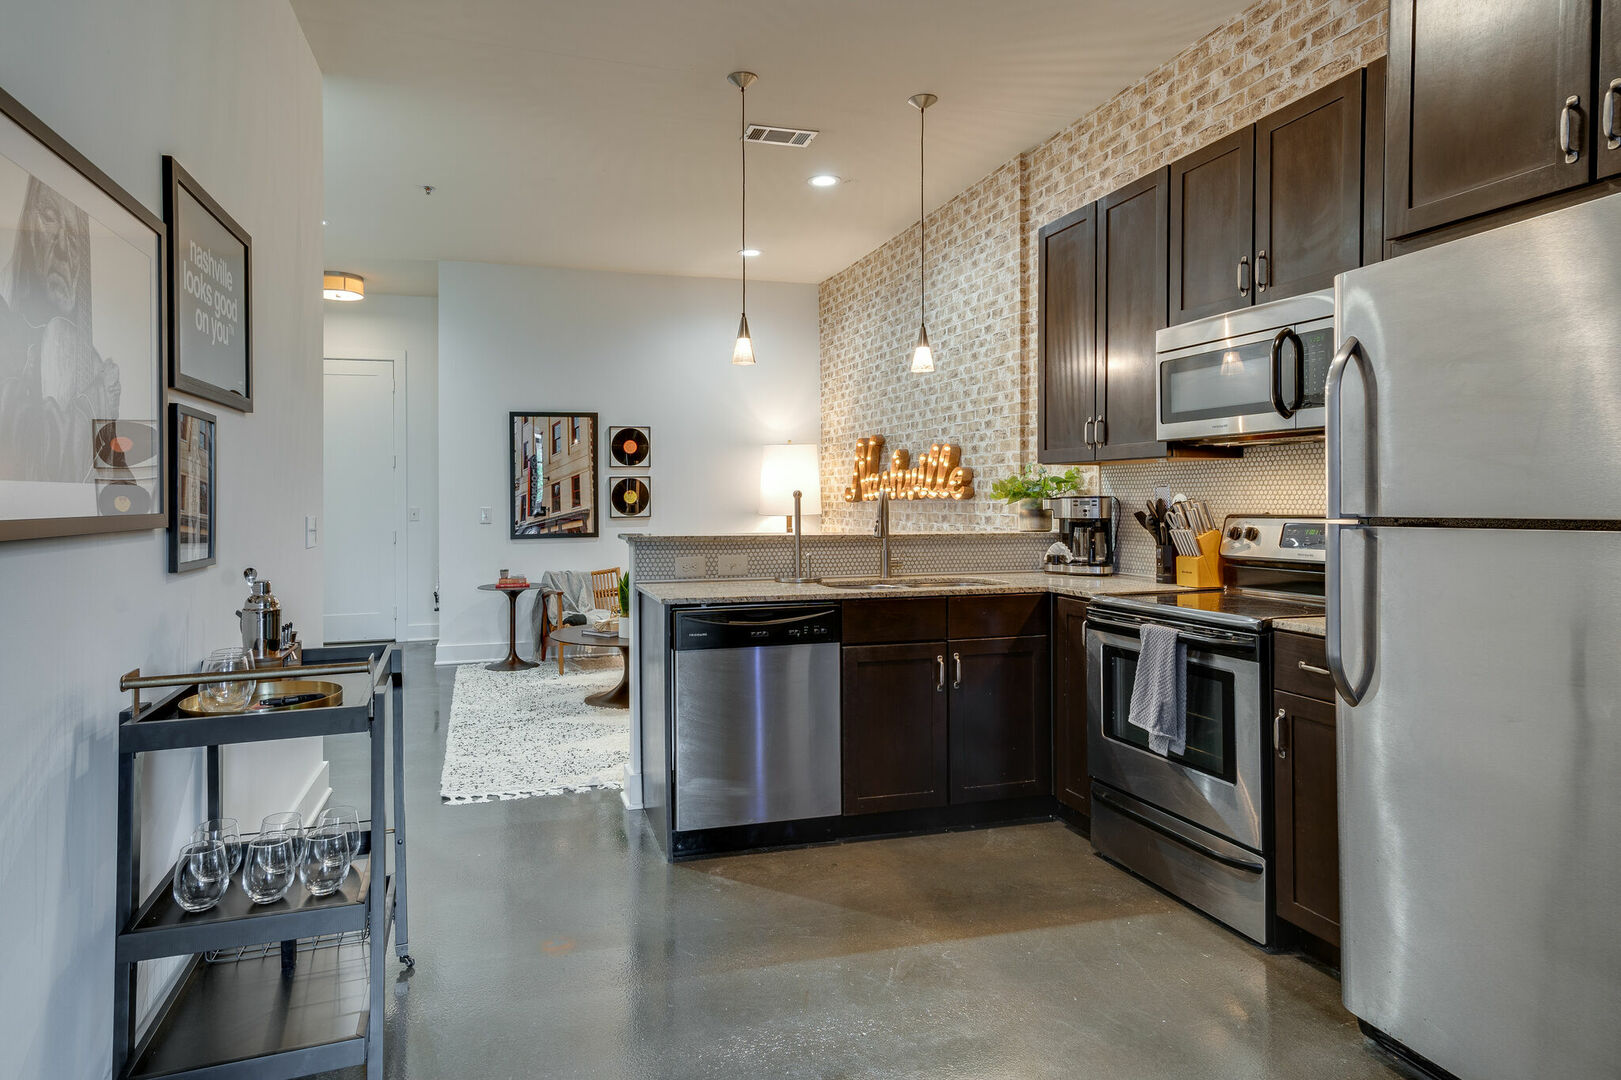 Fully equipped kitchen with stainless steel appliances stocked with your basic cooking essentials.